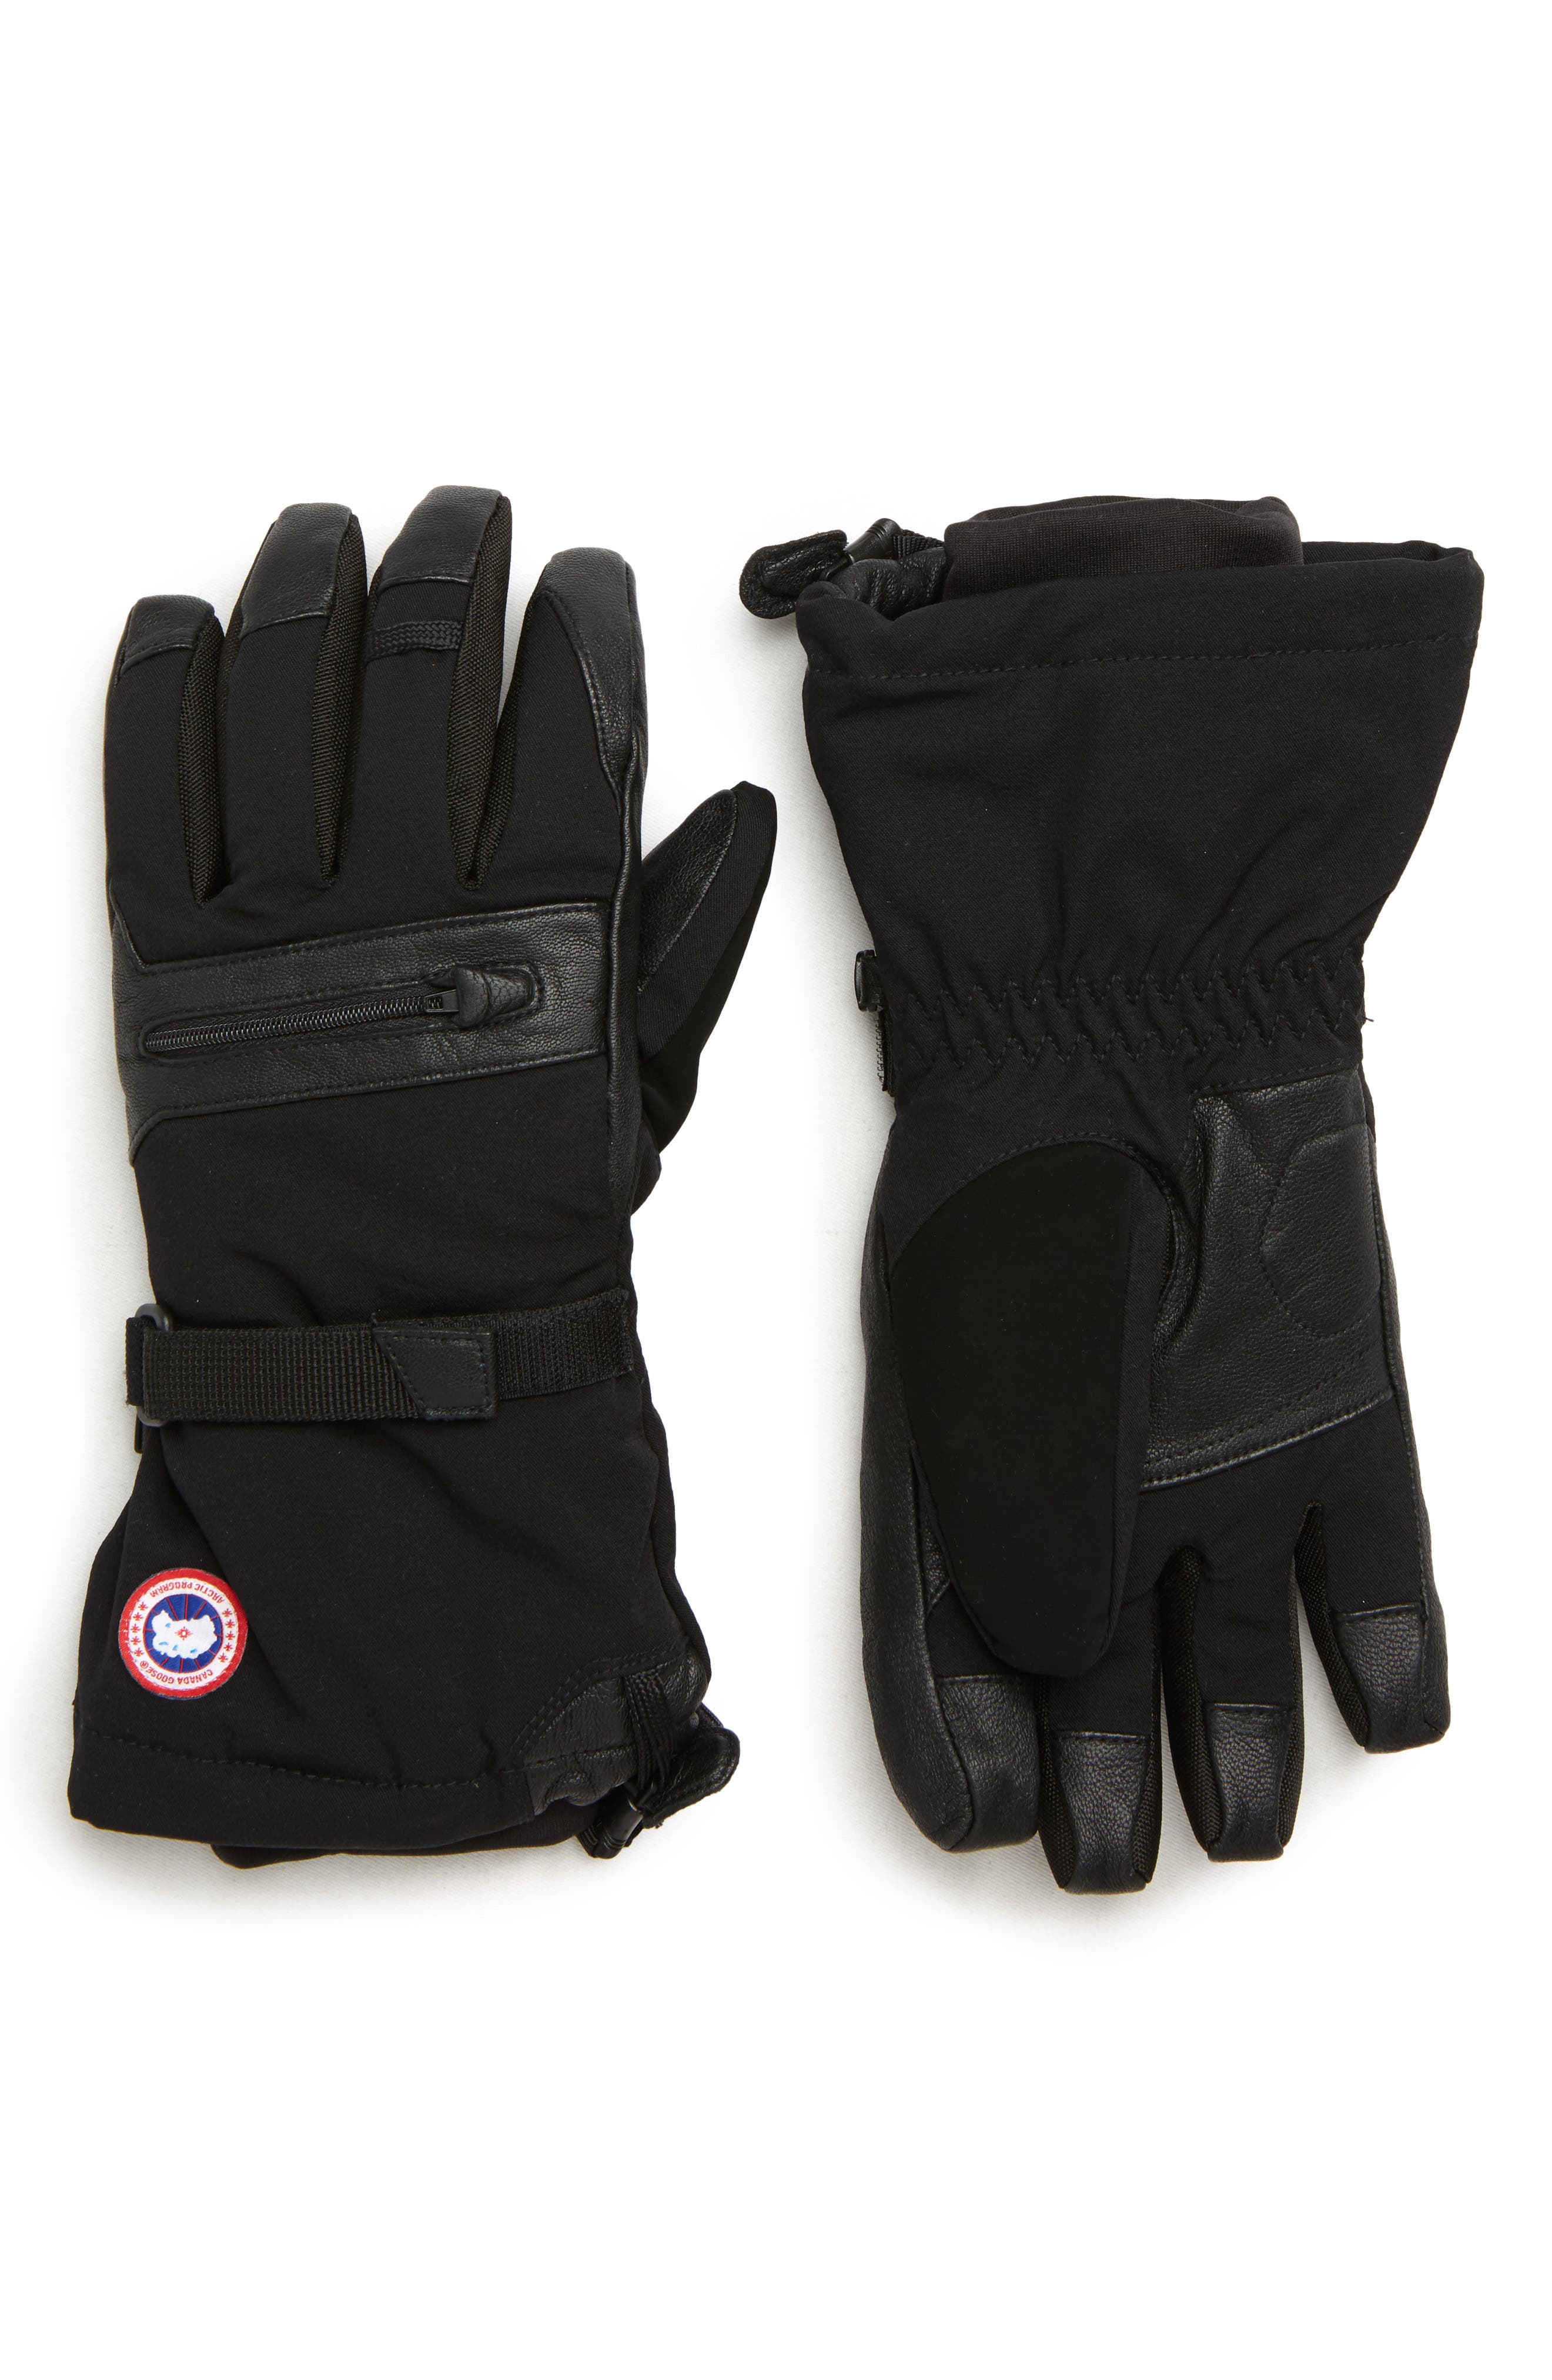 Canada Goose Northern Utility Gloves in Black at Nordstrom, Size Medium Us